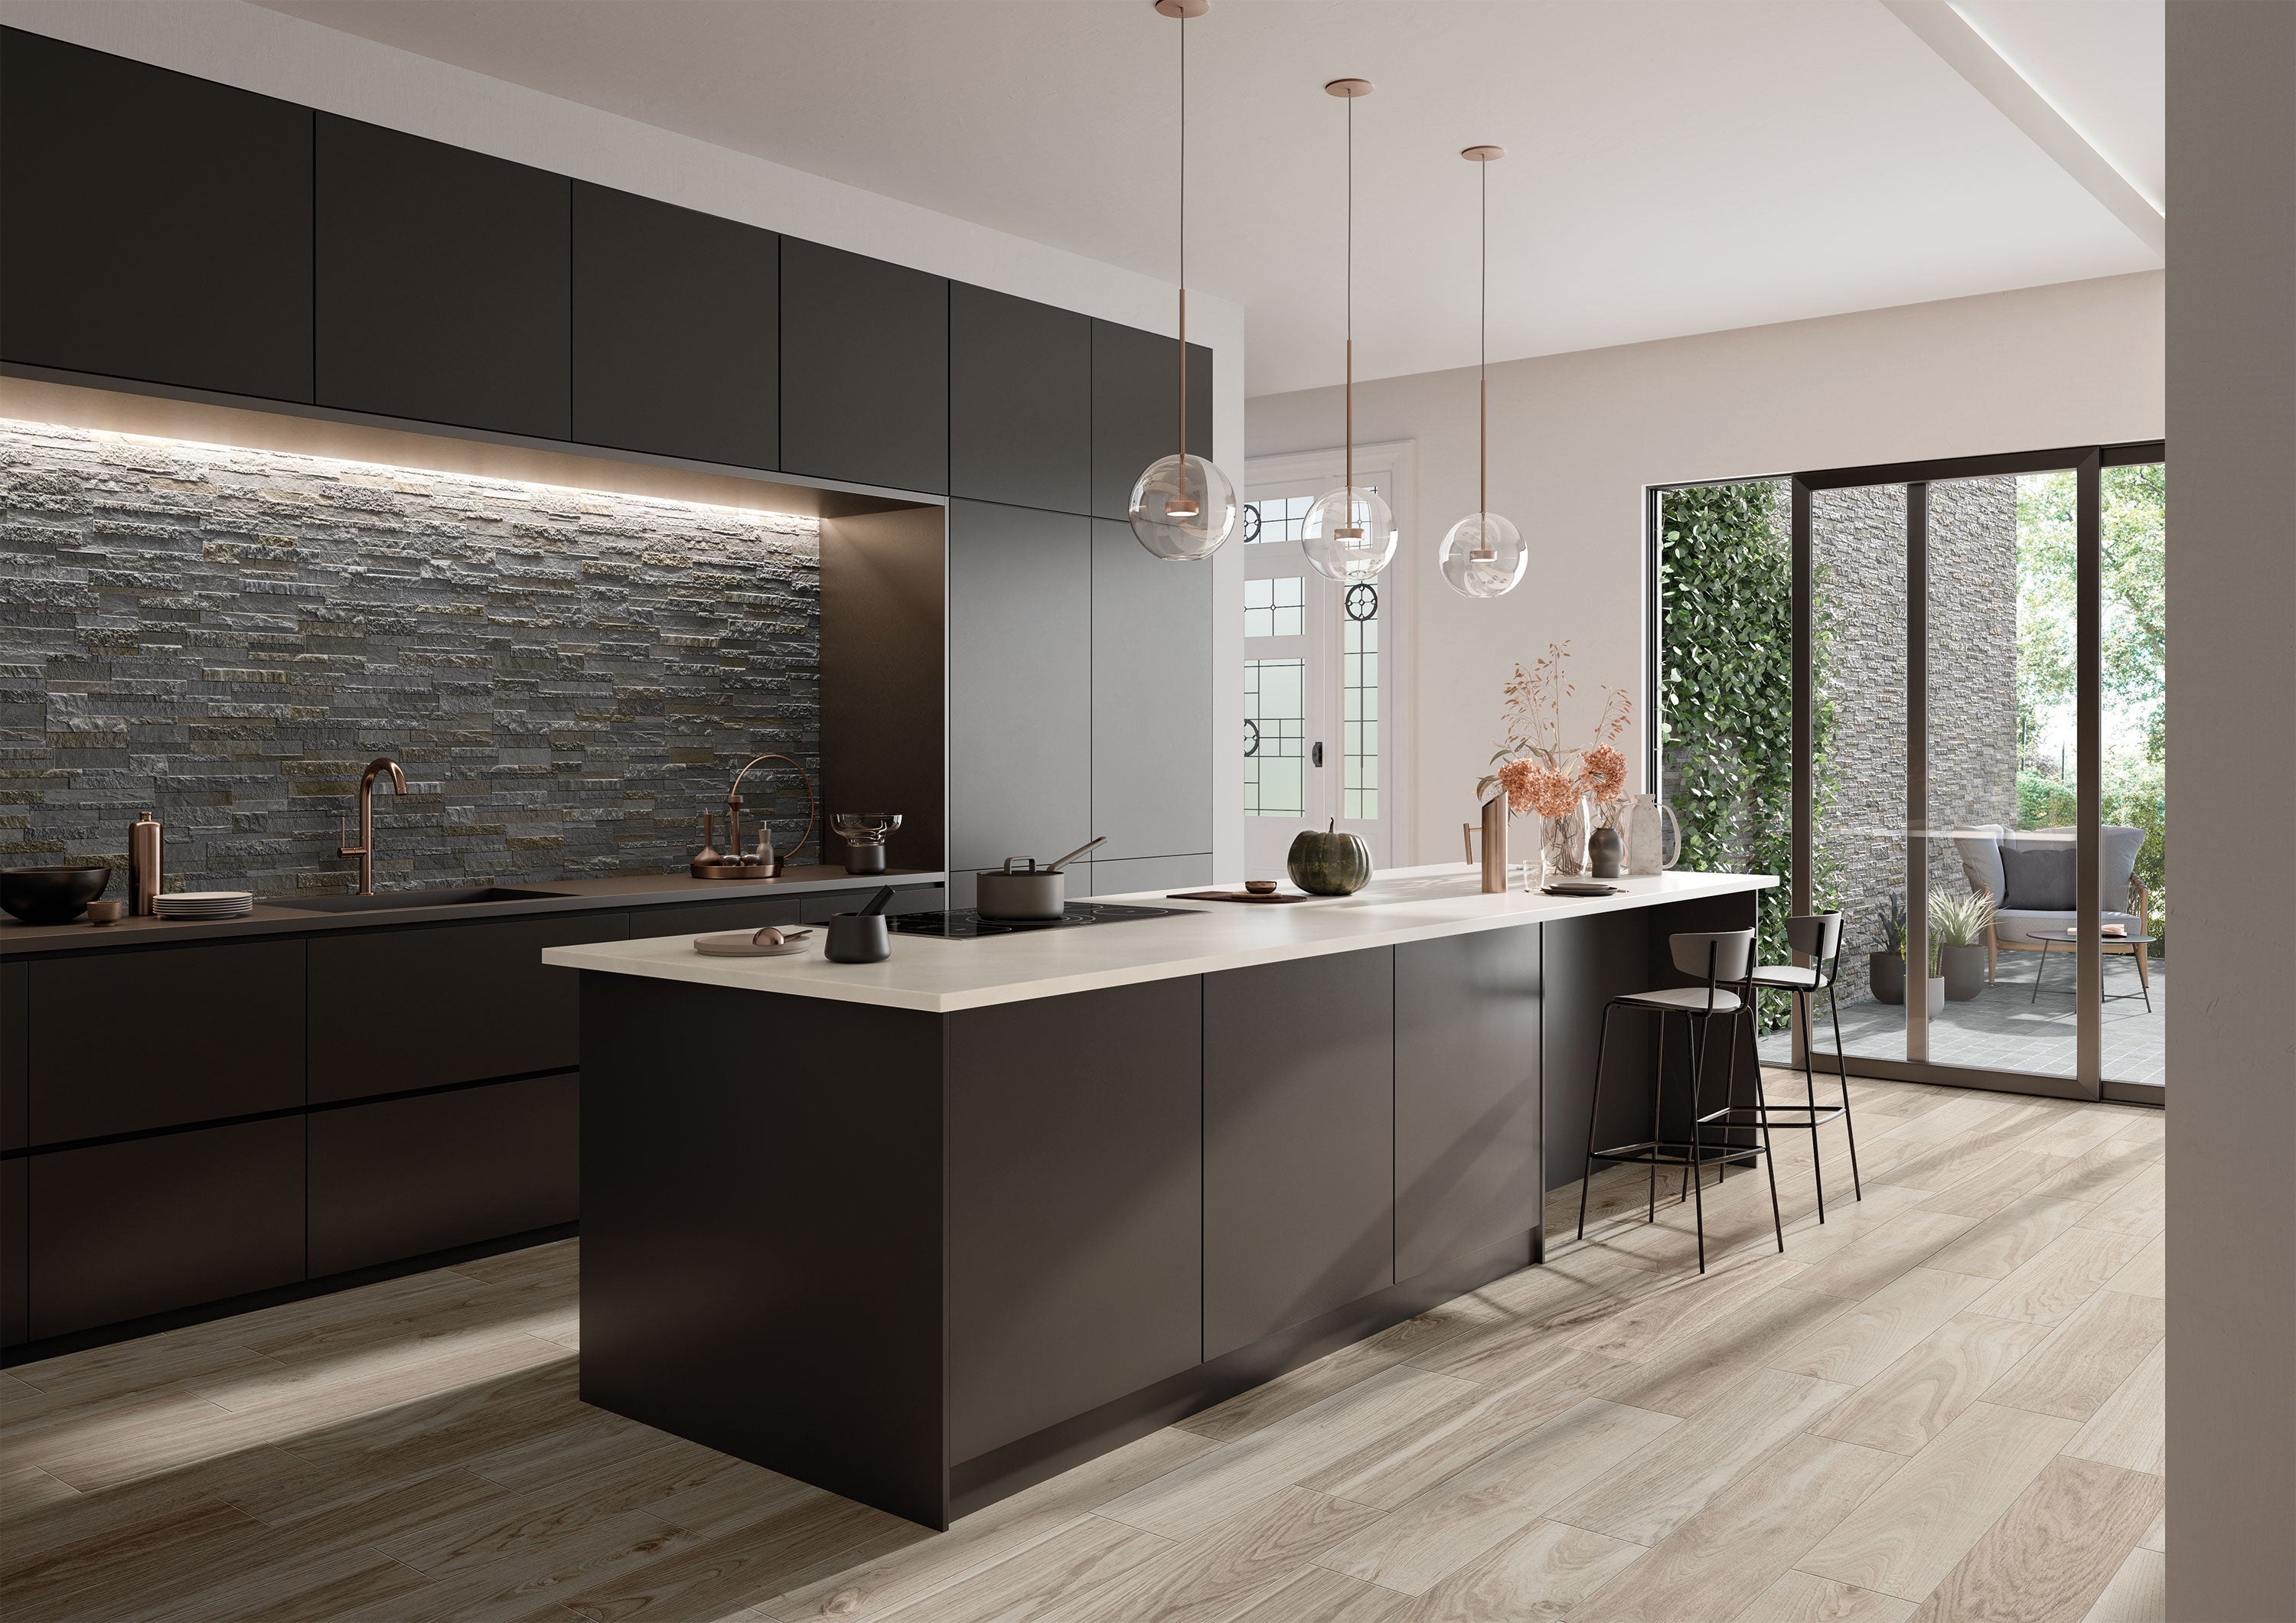 Modern kitchen with bluestone ledgestone porcelain tile backsplash from Surface Group's Pro Collection, featuring sleek cabinetry and pendant lighting.